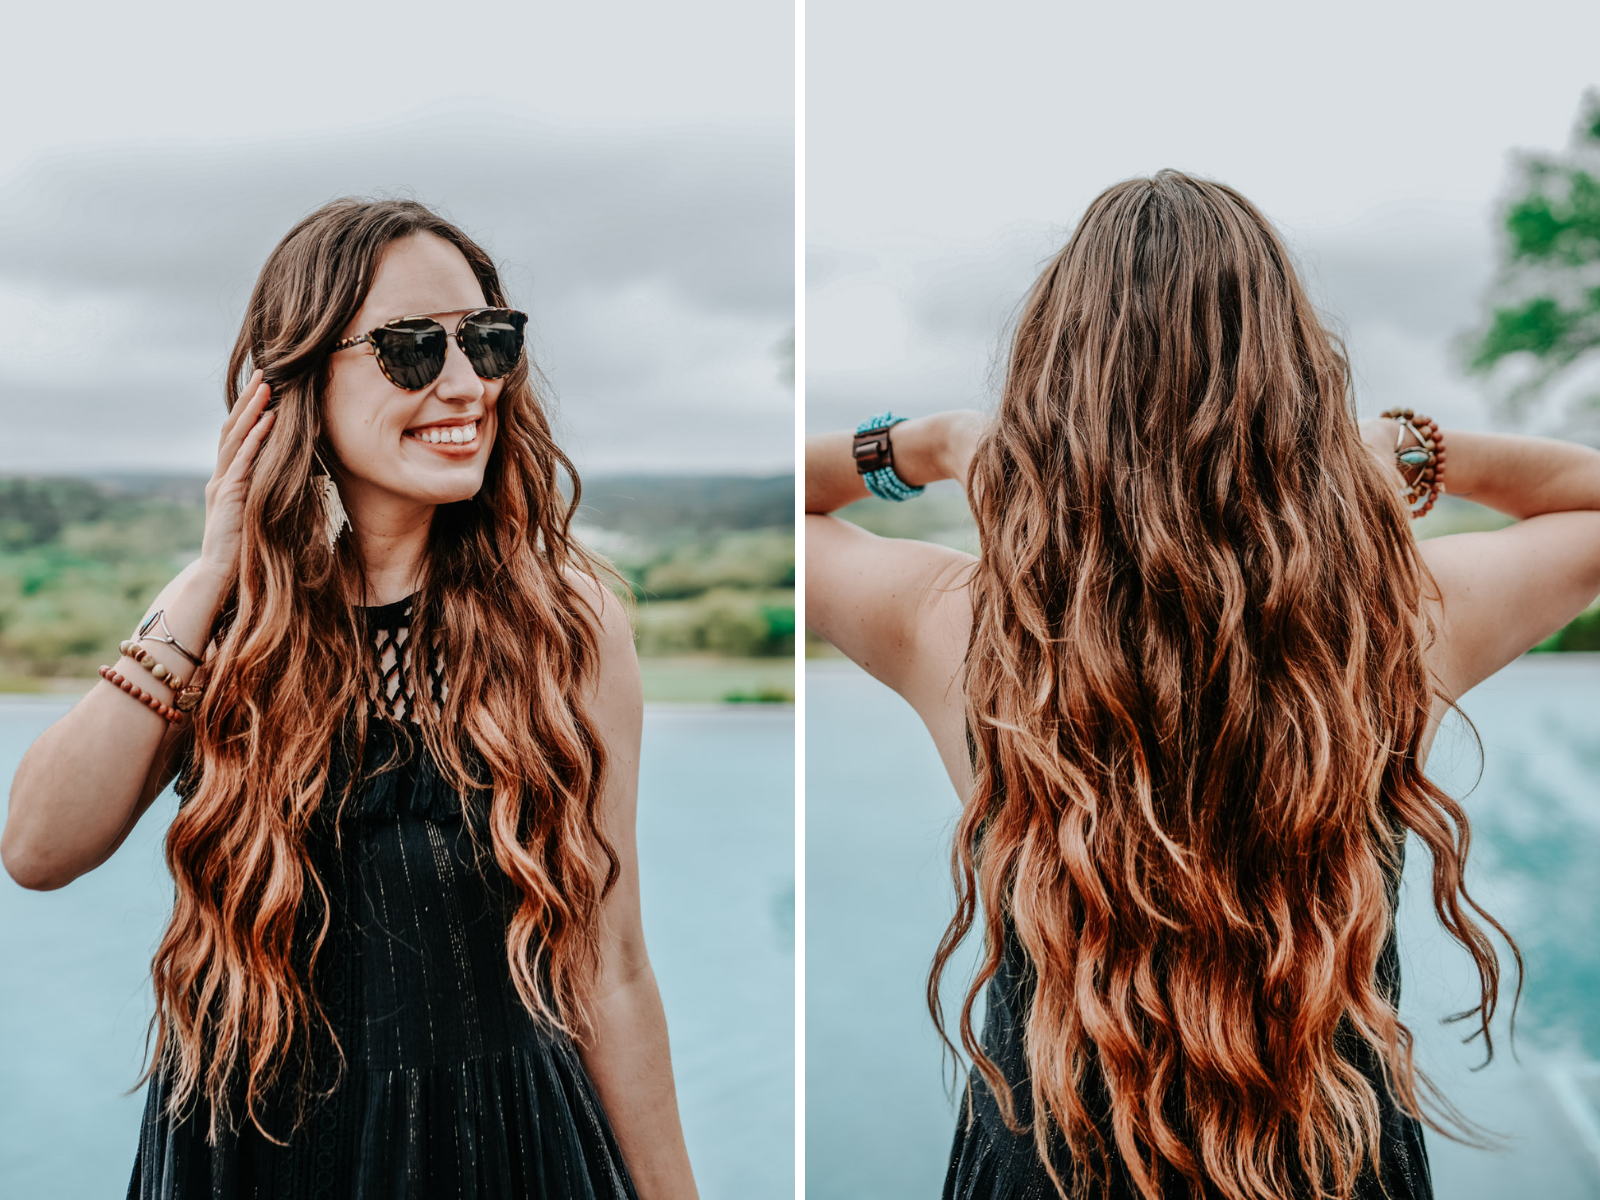 Pantene 14 Day Challenge results for healthier and shinier hair featured by top US beauty blog, Lone Star Looking Glass